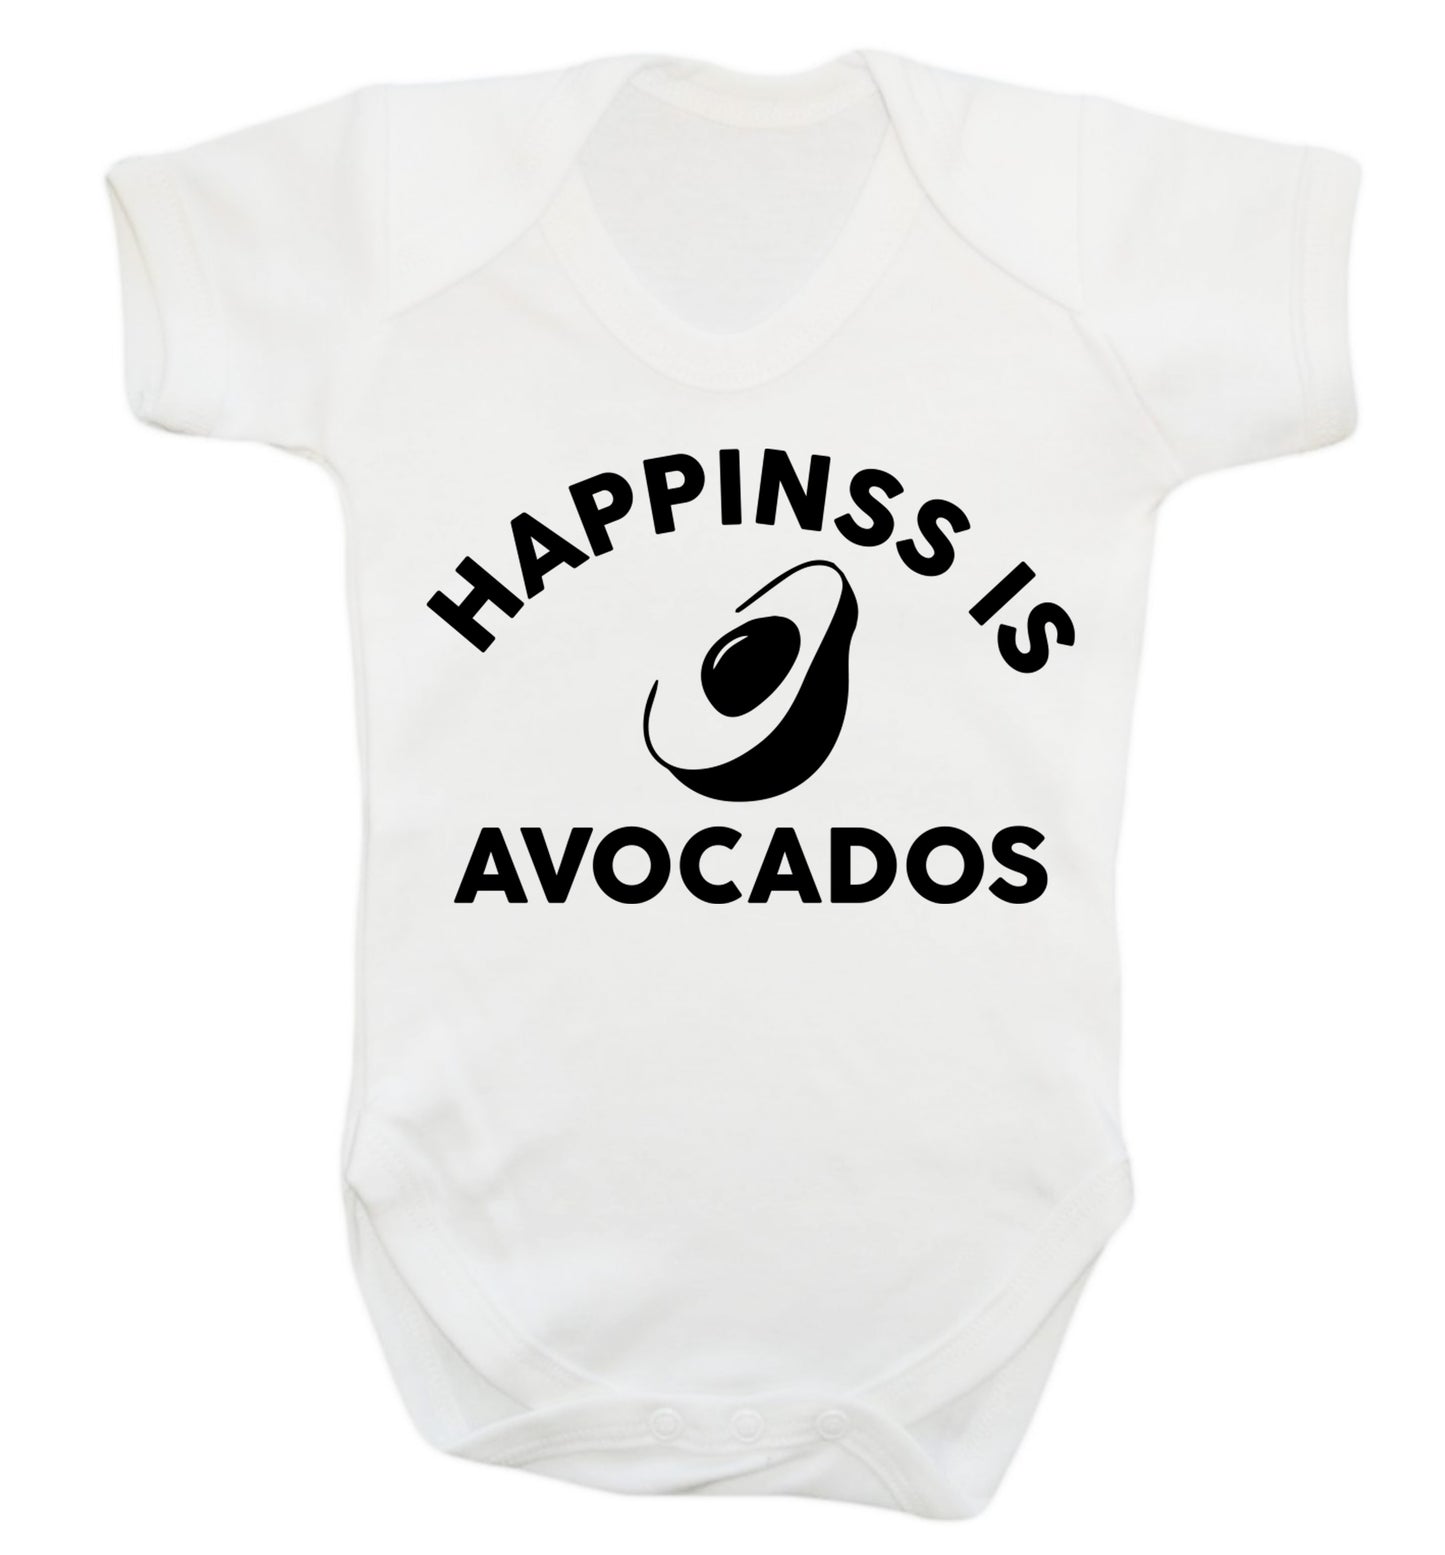 Happiness is avocados Baby Vest white 18-24 months